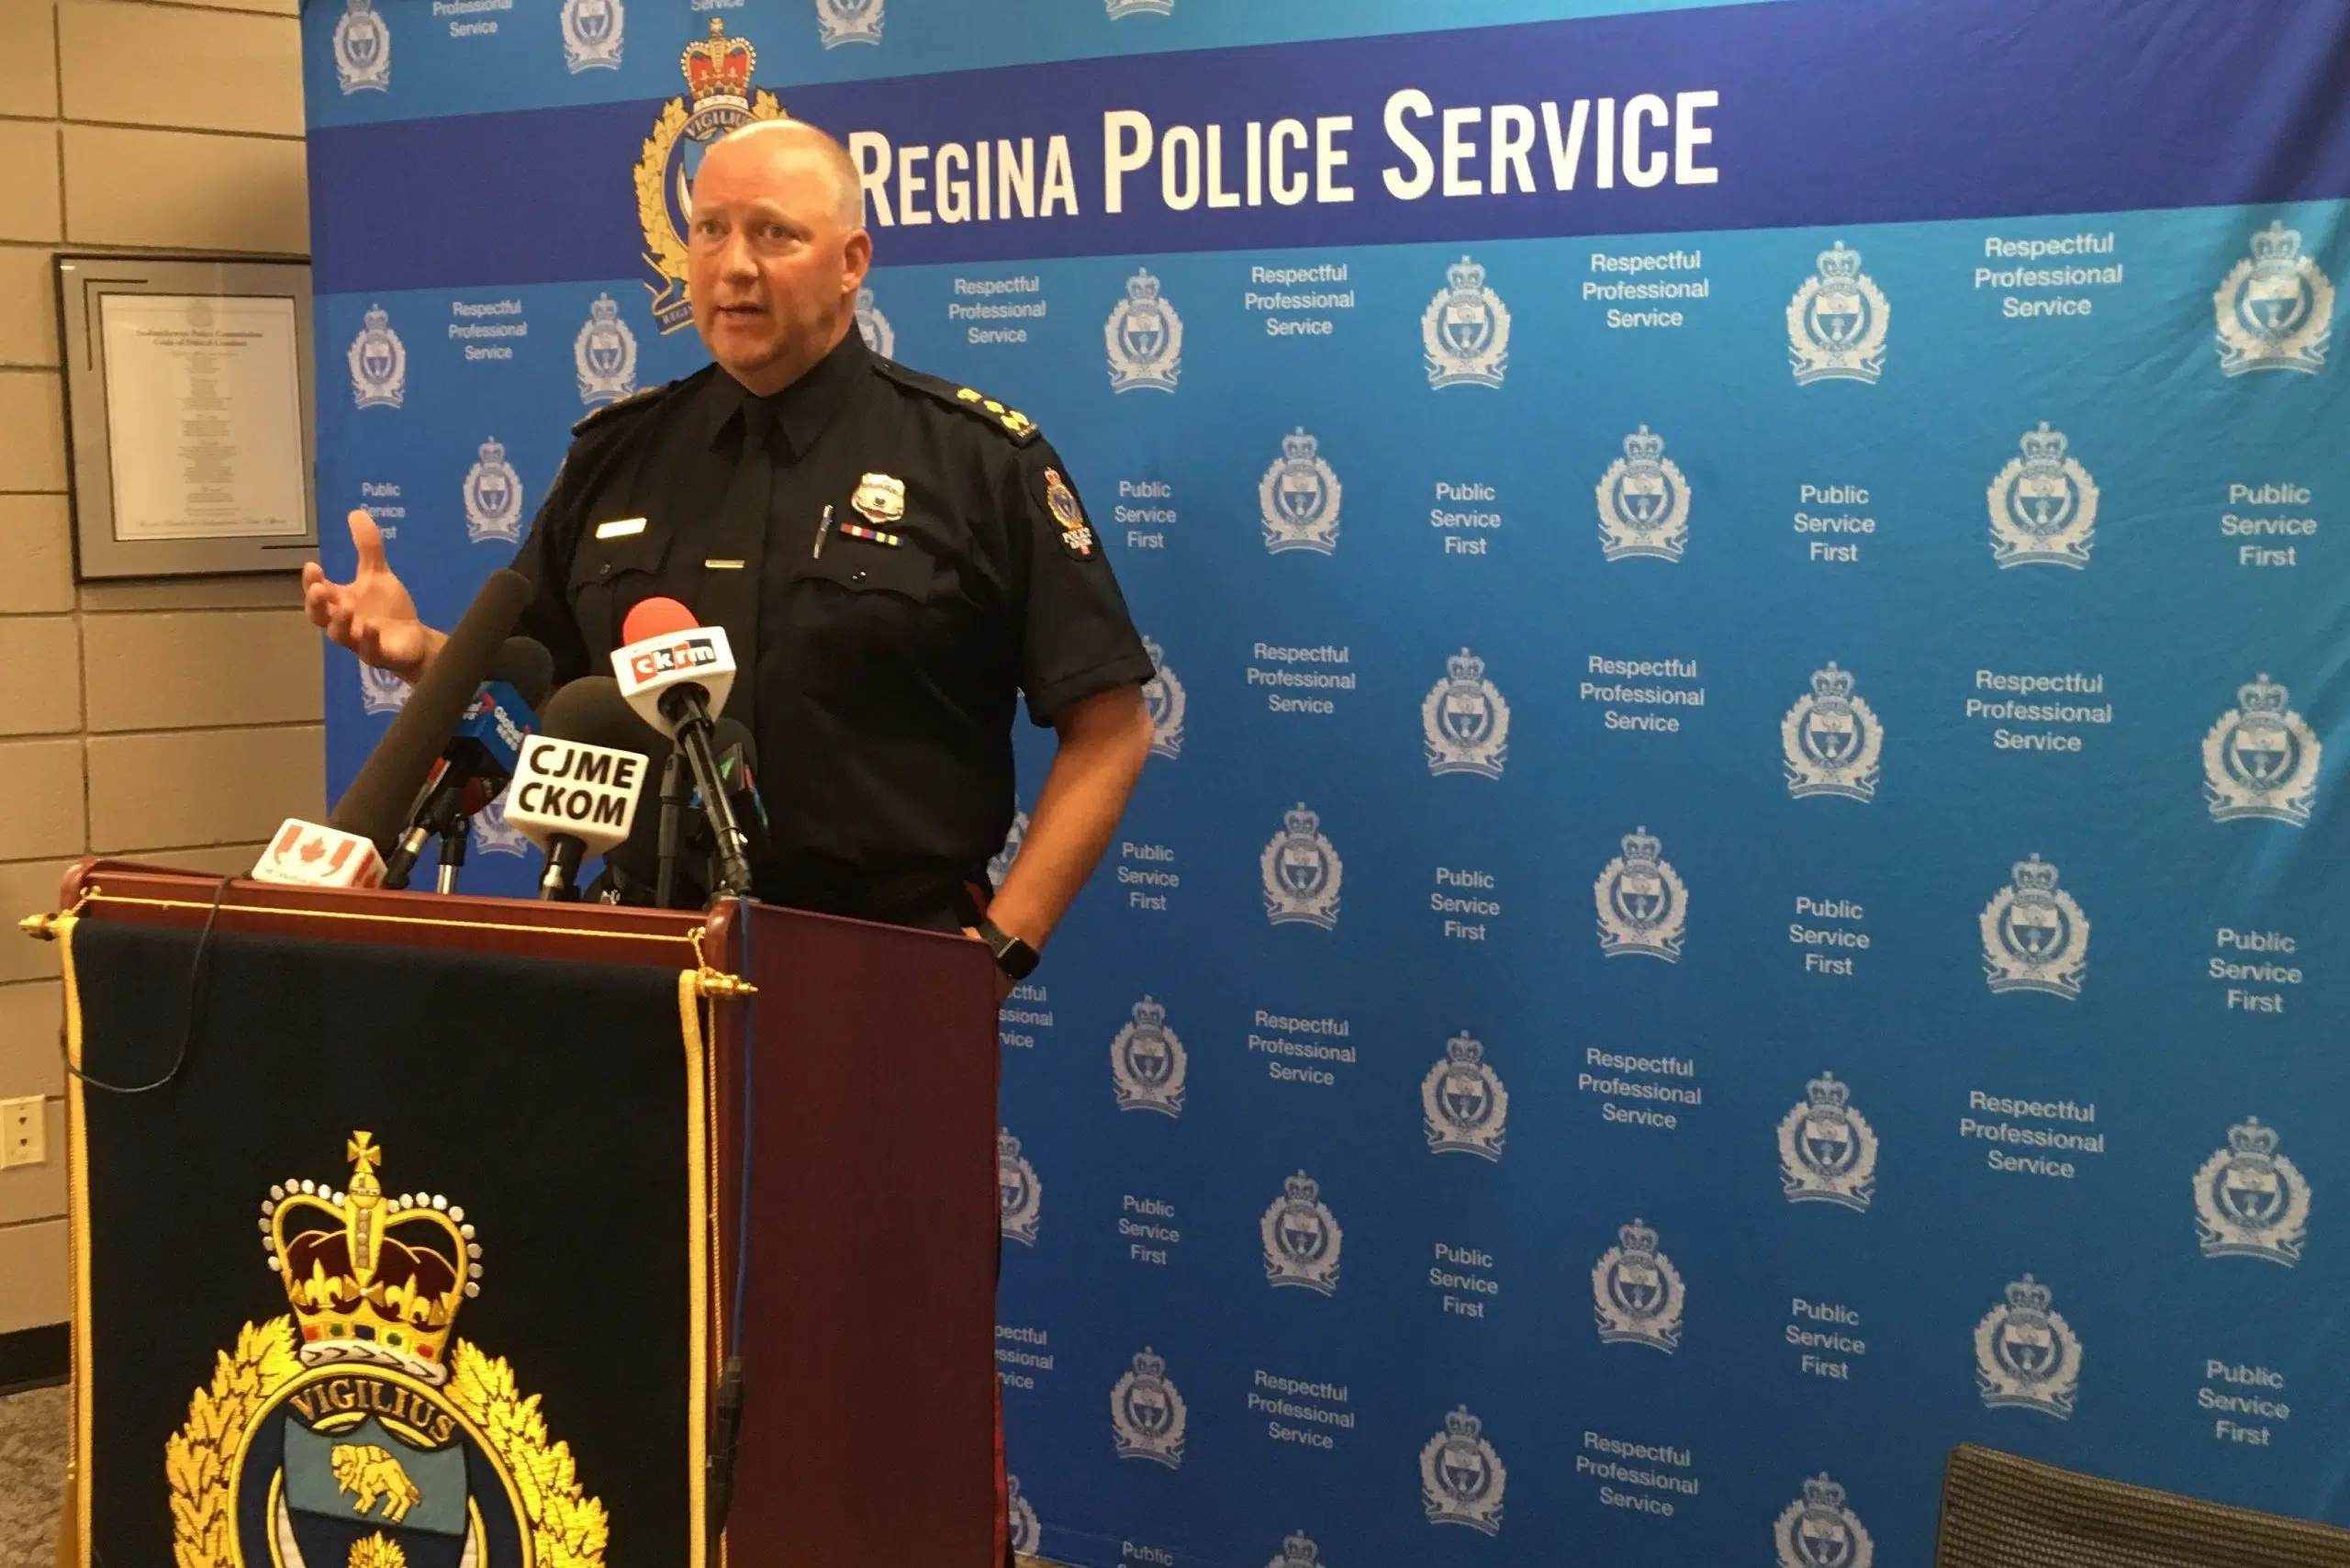 Attempted murder charges up, drug crimes down in Regina's biannual crime data